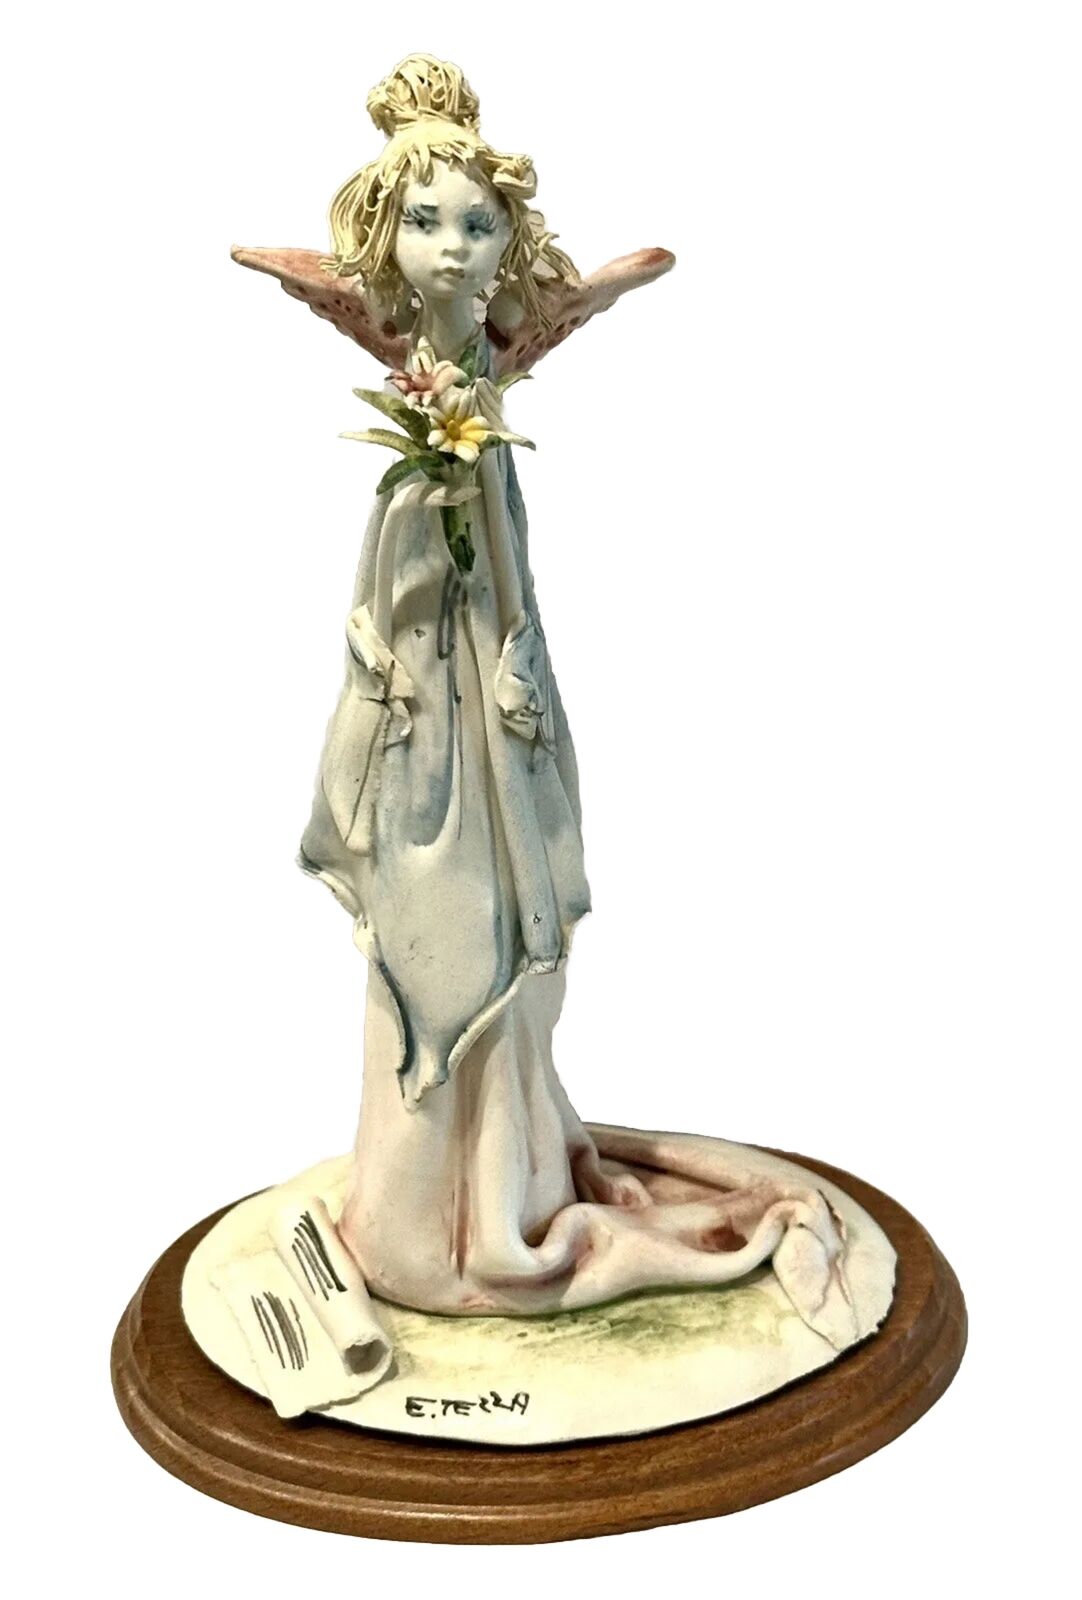 E. Tezza Porcelain Figurine - Fairy With Flowers In Hand  #763 Italy